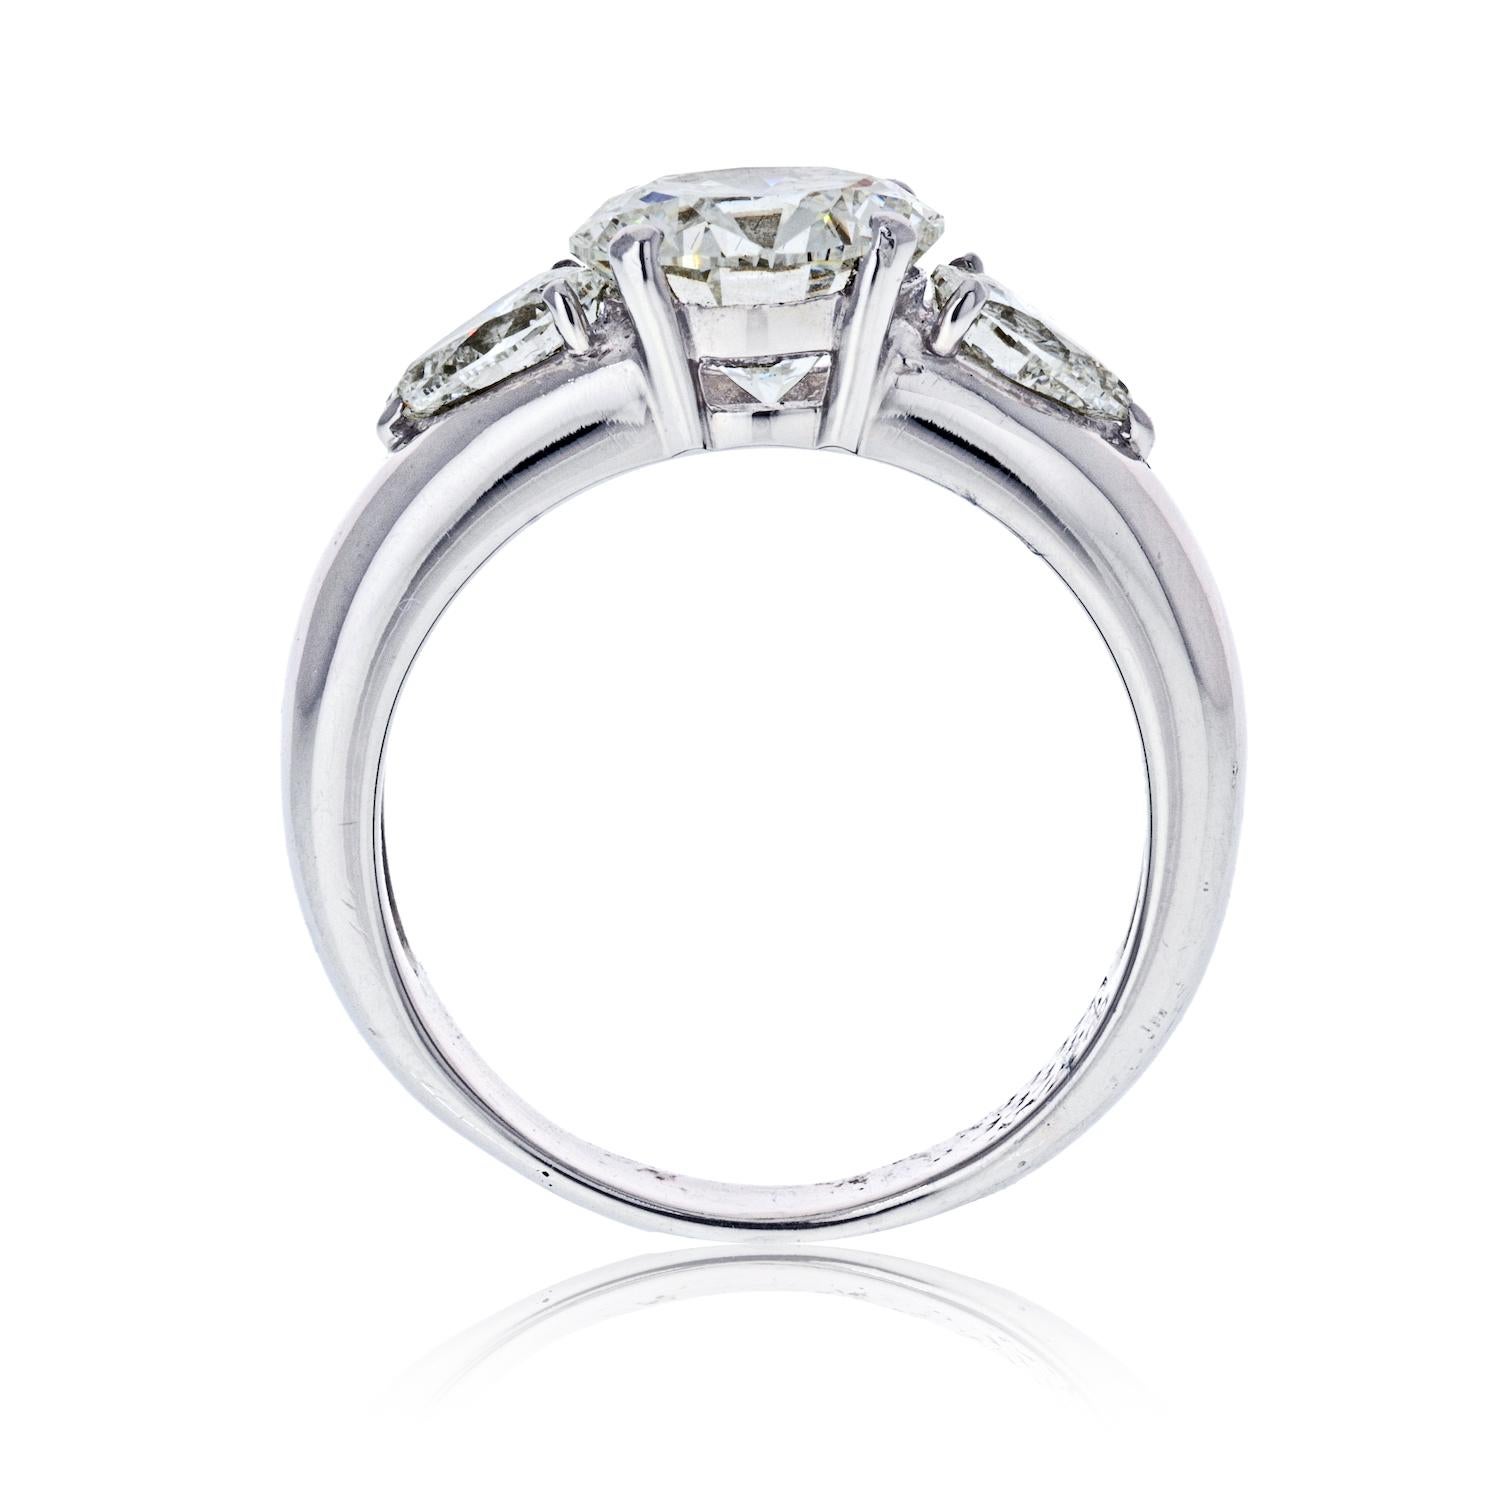 VCA Round Cut Diamond Engagement Ring in Platinum. This modern Van Cleef and Arpels engagement ring features a 2.03 carat round cut diamond. The center diamond is of impeccable quality F color, Flawless clarity with GIA certificate and it really